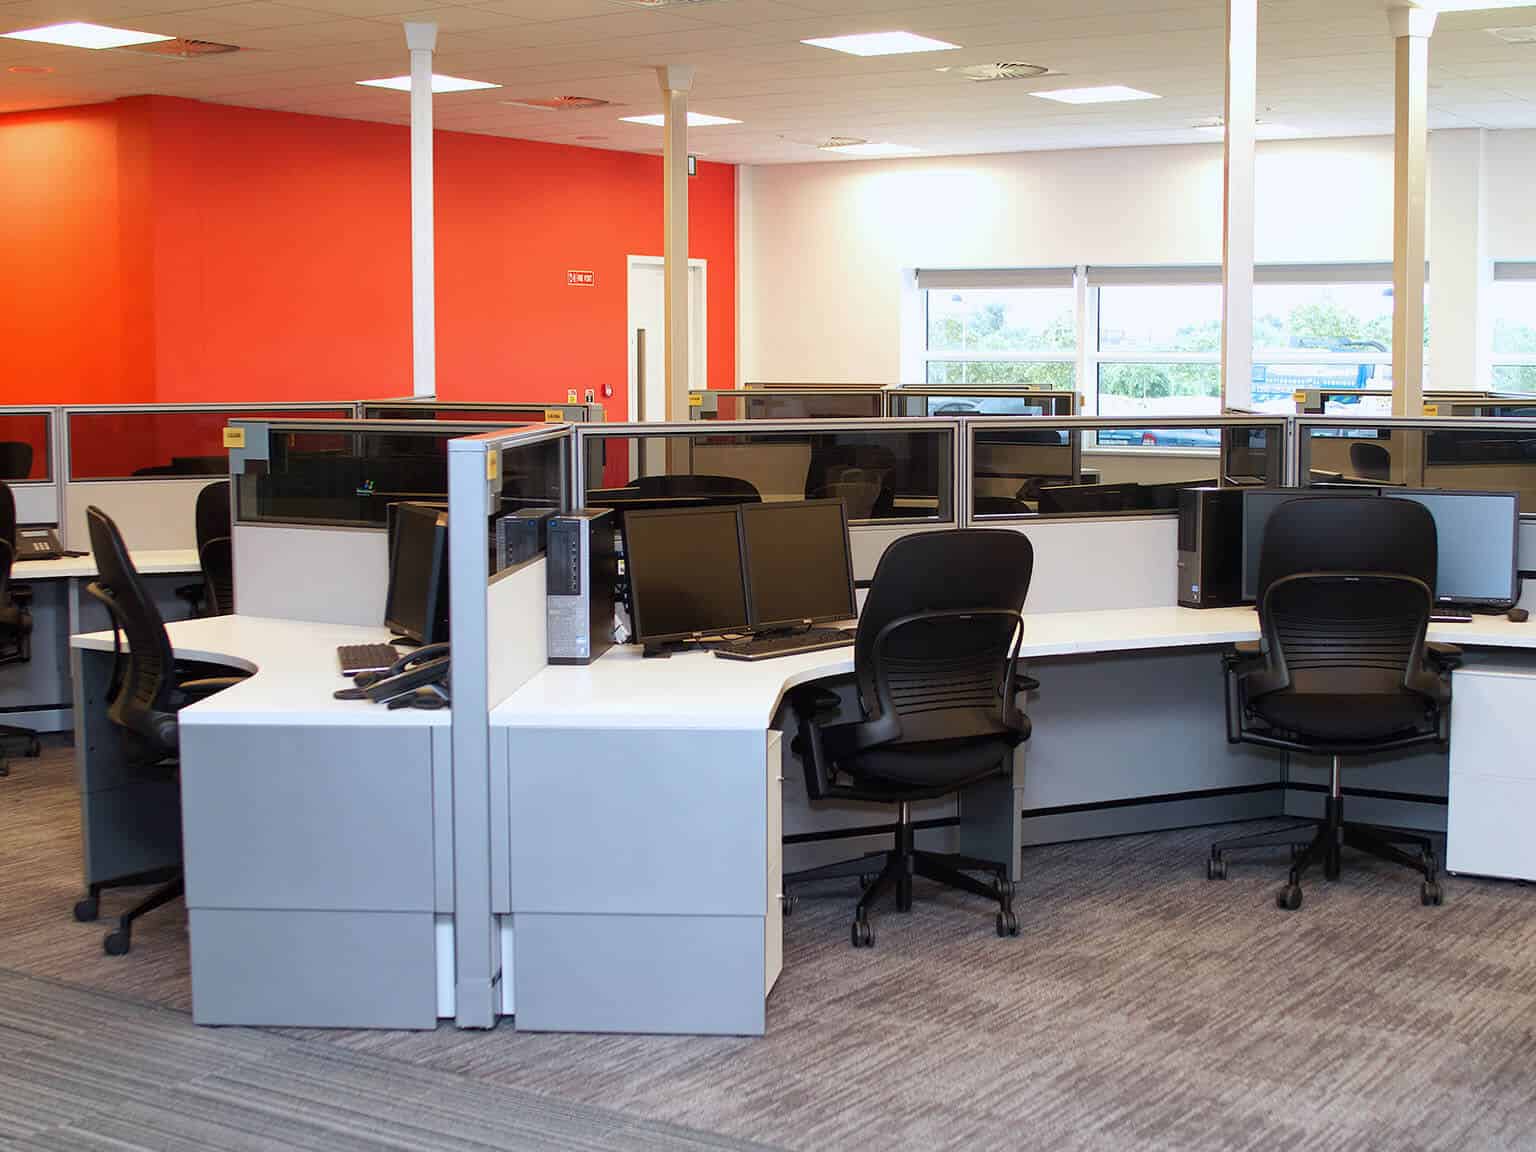 Office space with red and white walls, gray carpet, and cubicles. Each cubicle has two chairs and two monitors.